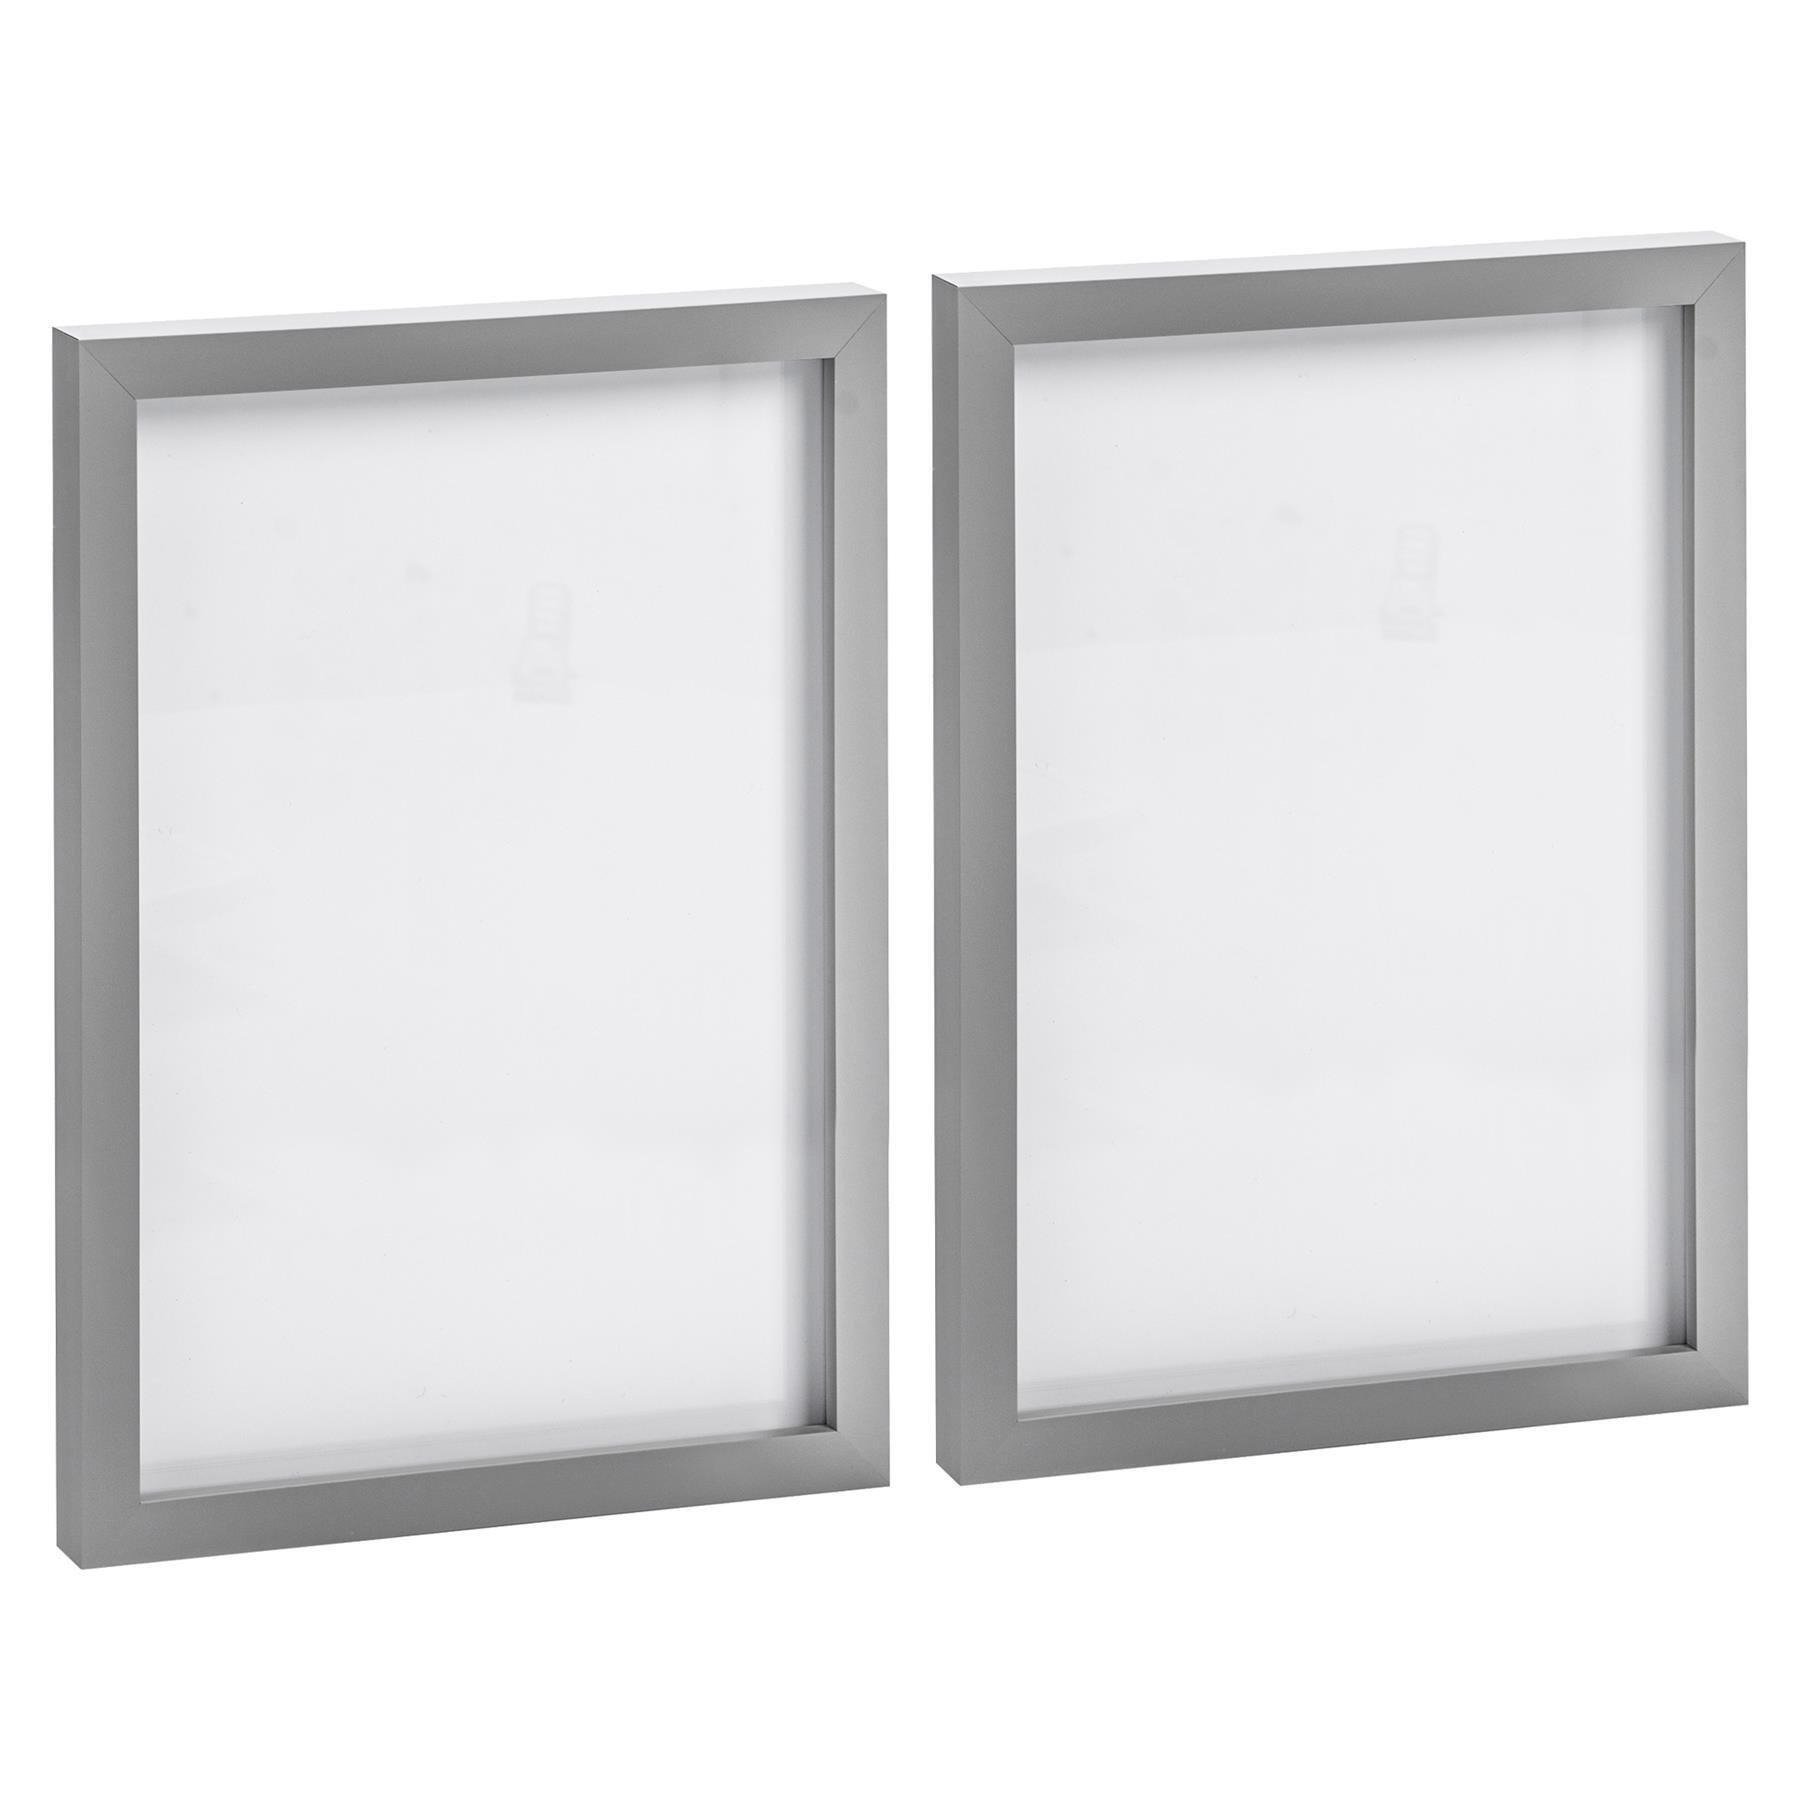 "Photo Frames - A4 (8x12"") - Pack of 2" - image 1